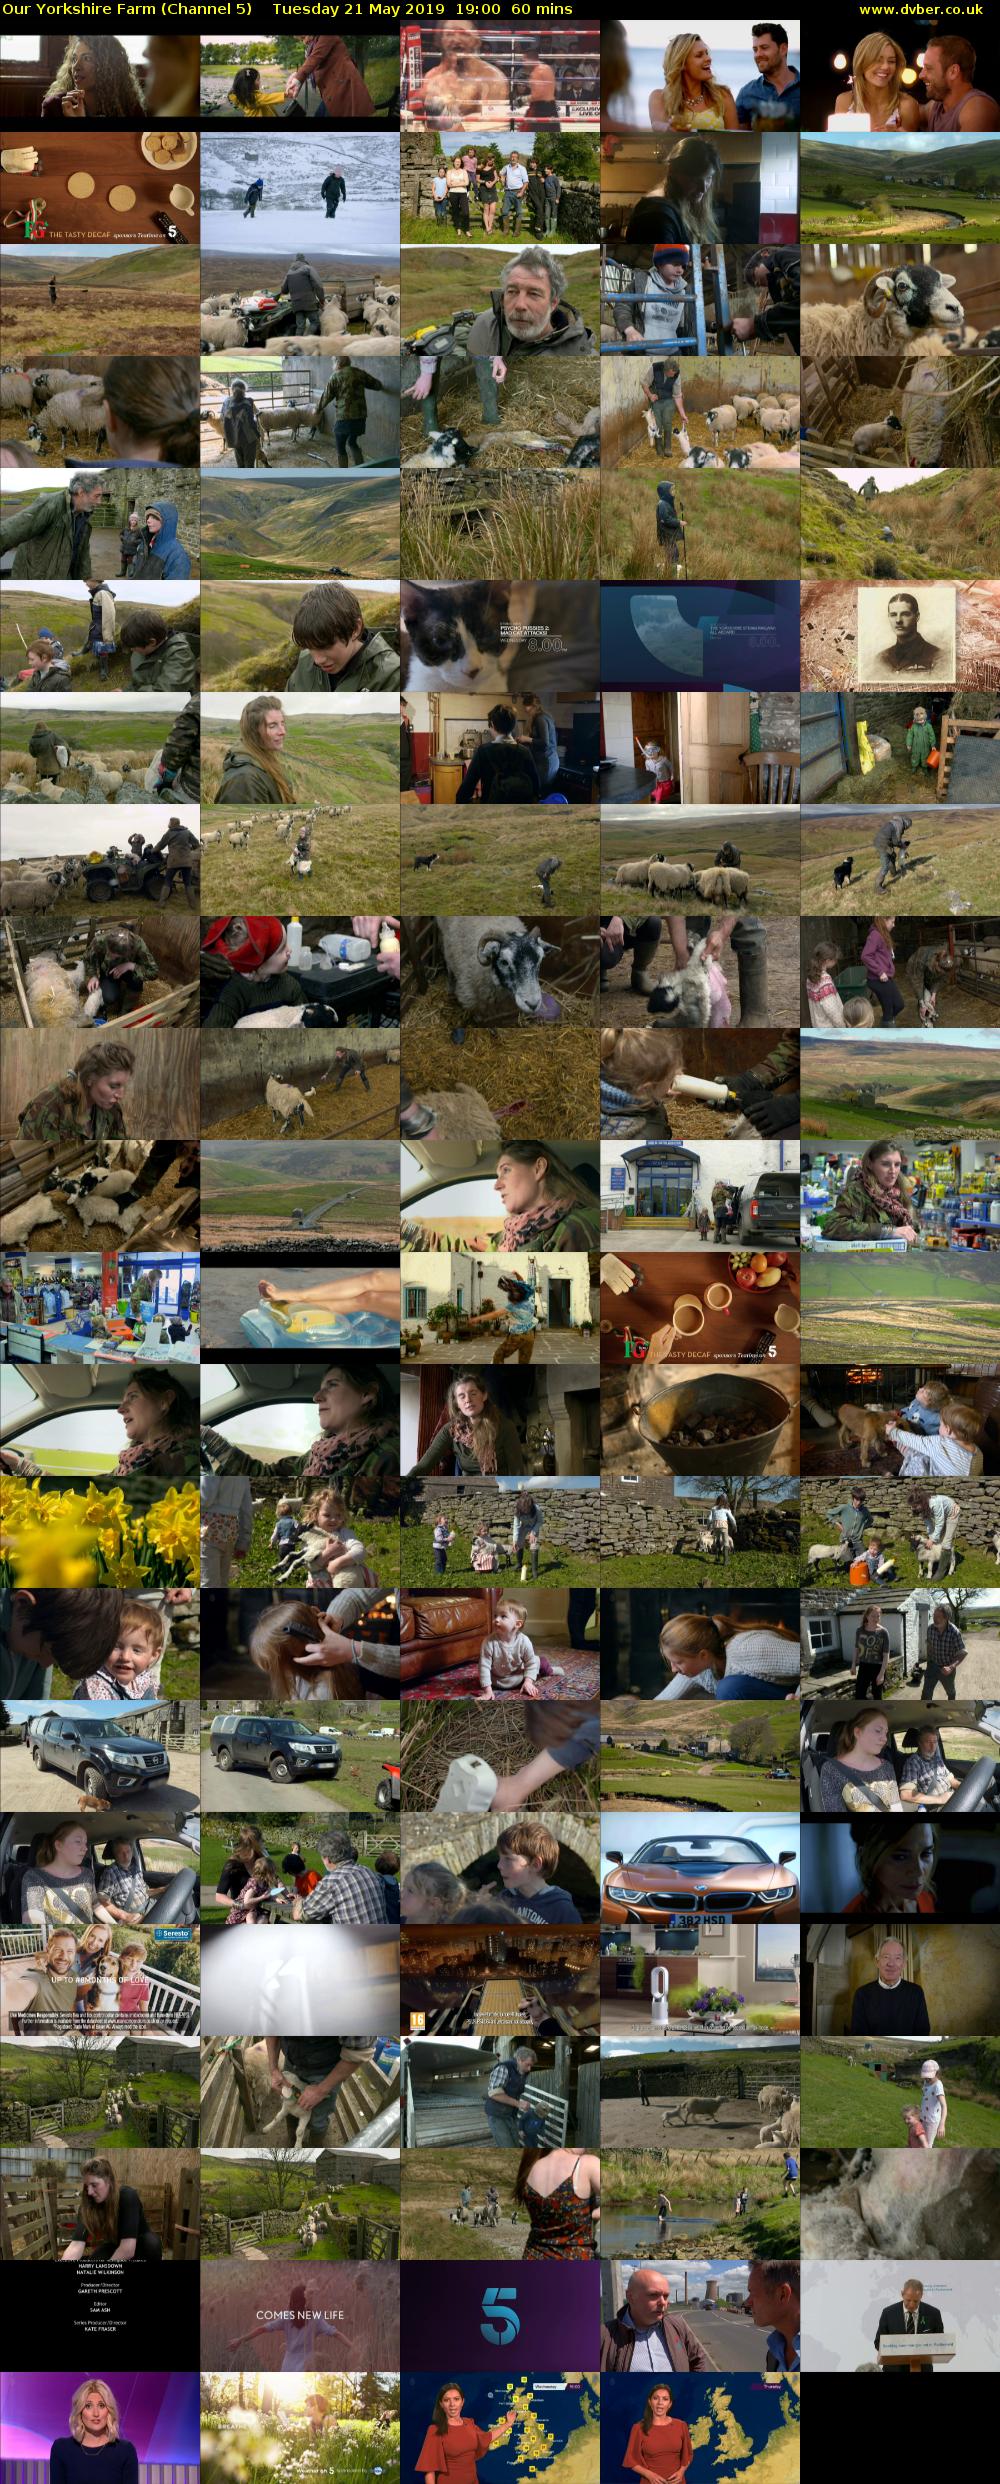 Our Yorkshire Farm (Channel 5) Tuesday 21 May 2019 19:00 - 20:00